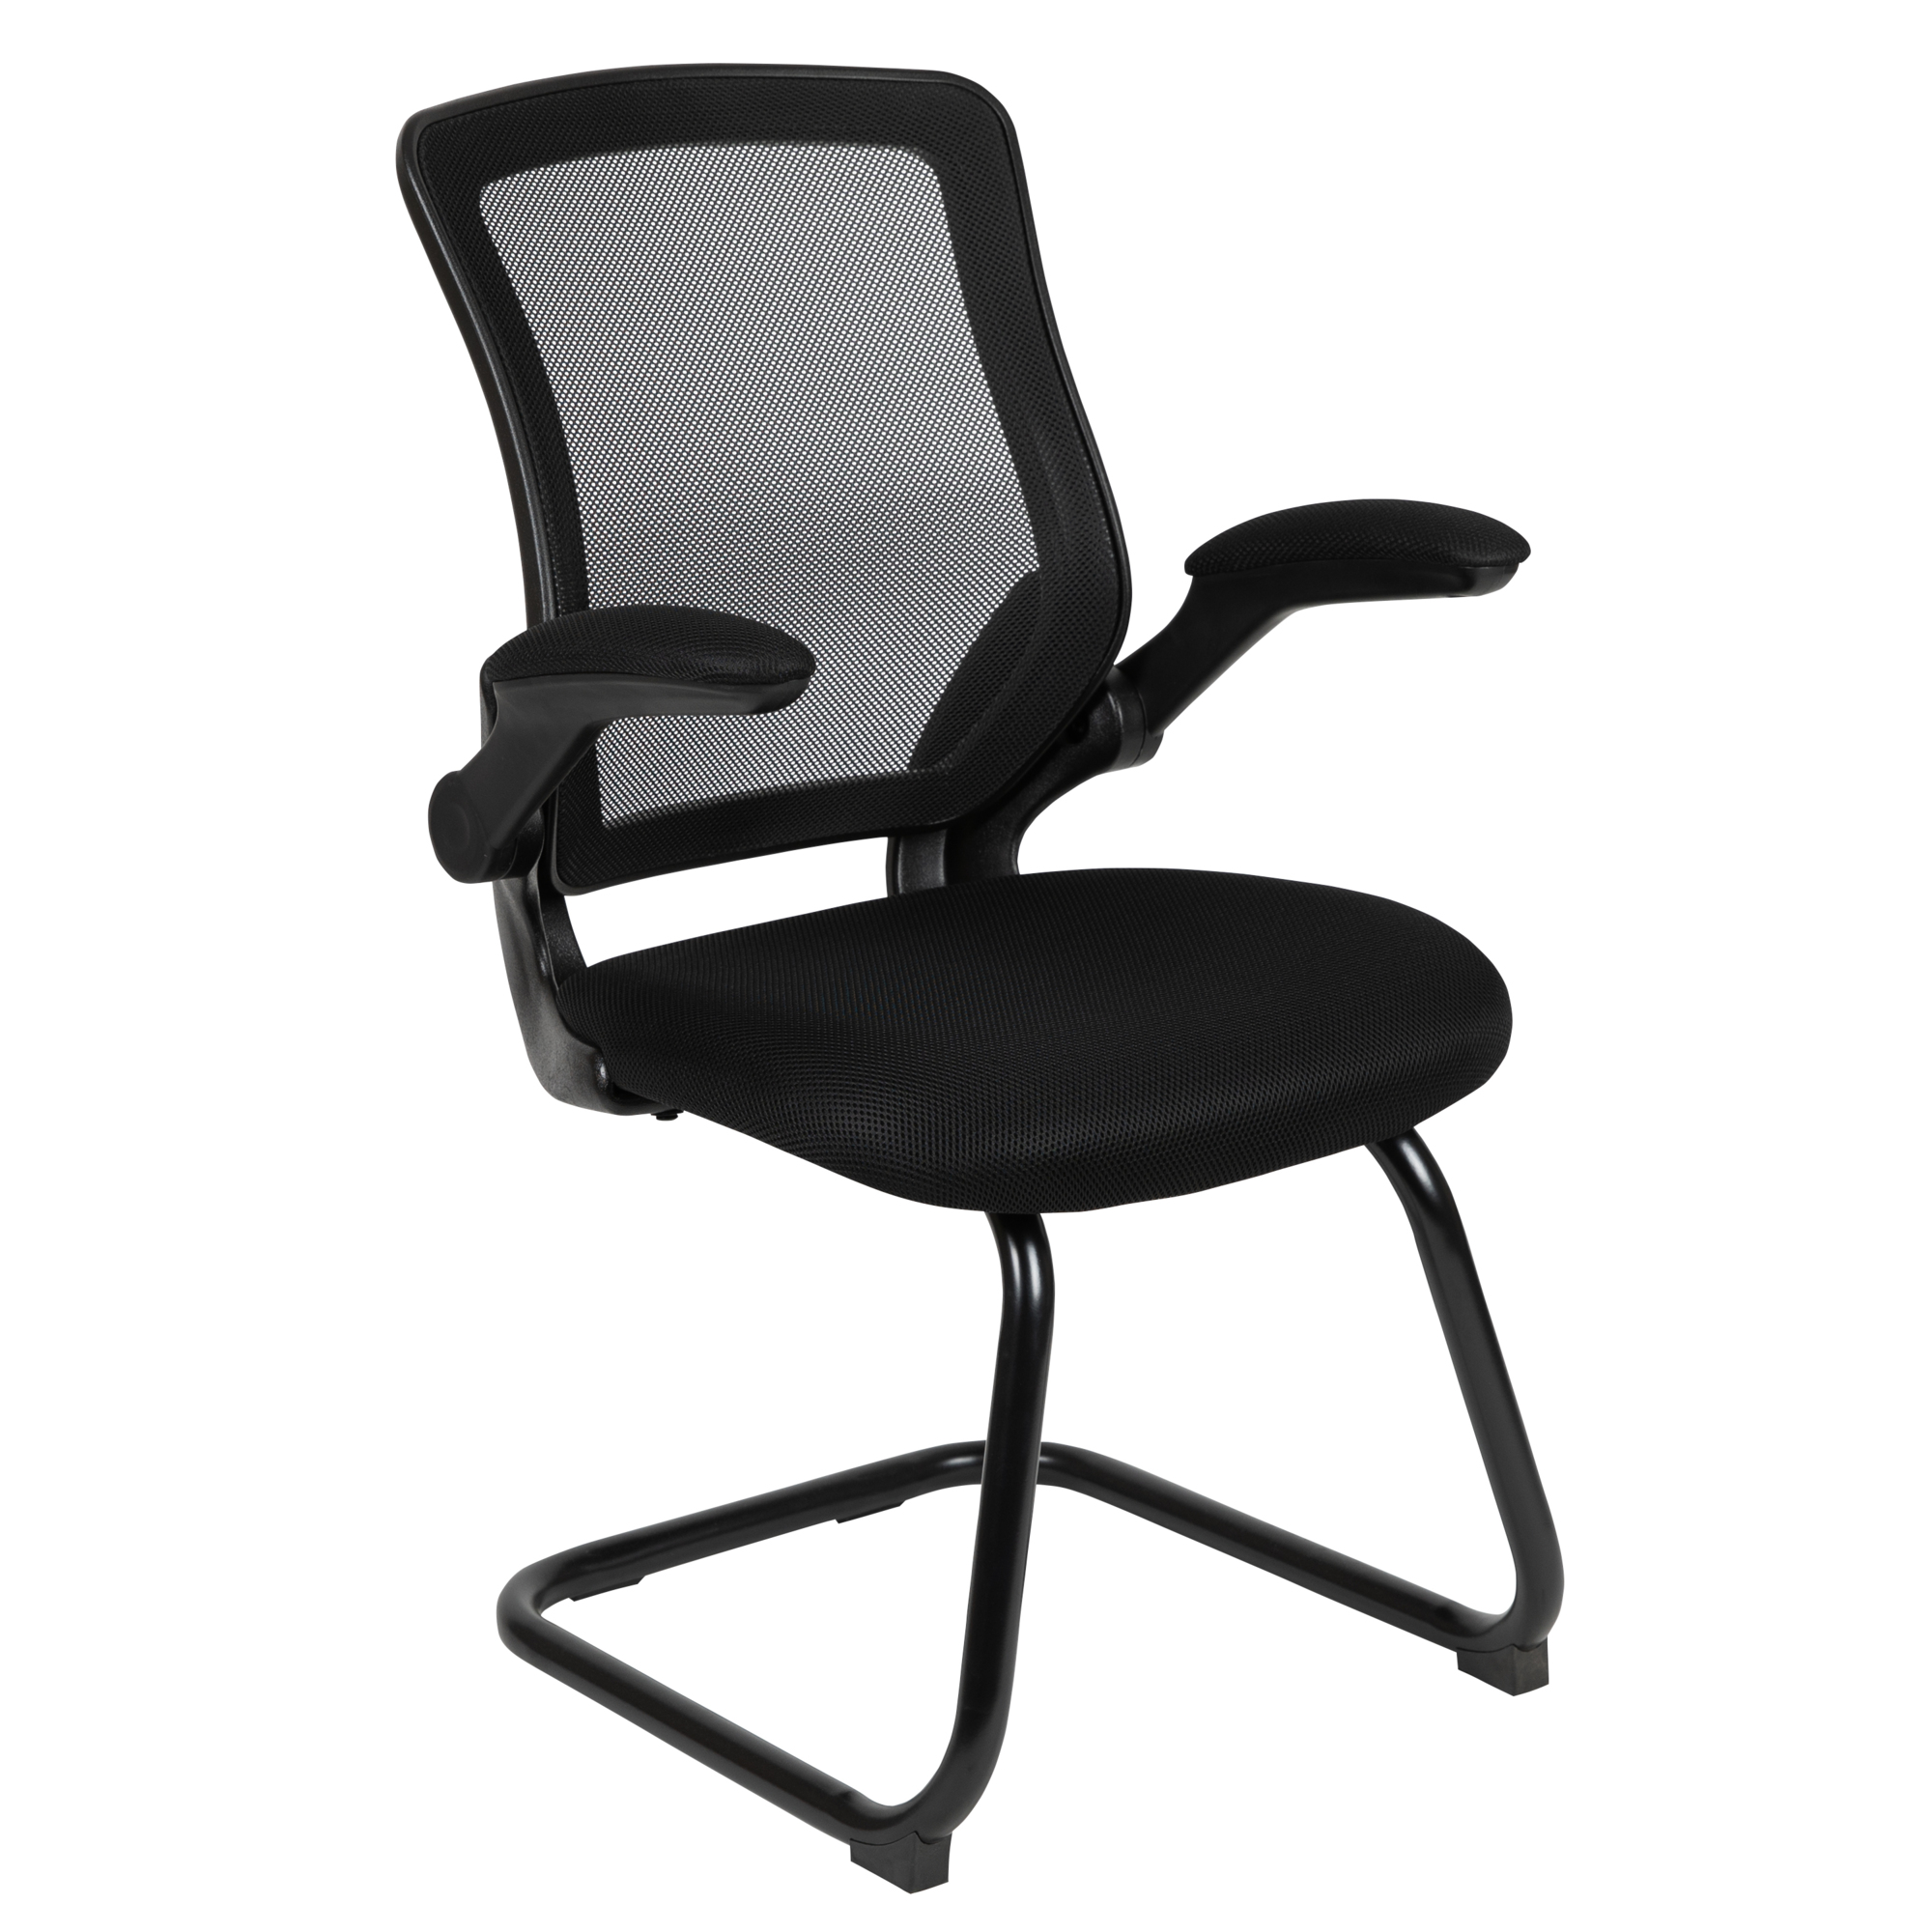 Flash Furniture, Black Mesh Sled Base Reception Guest Office Chair, Primary Color Black, Included (qty.) 1, Model BLZP8805C